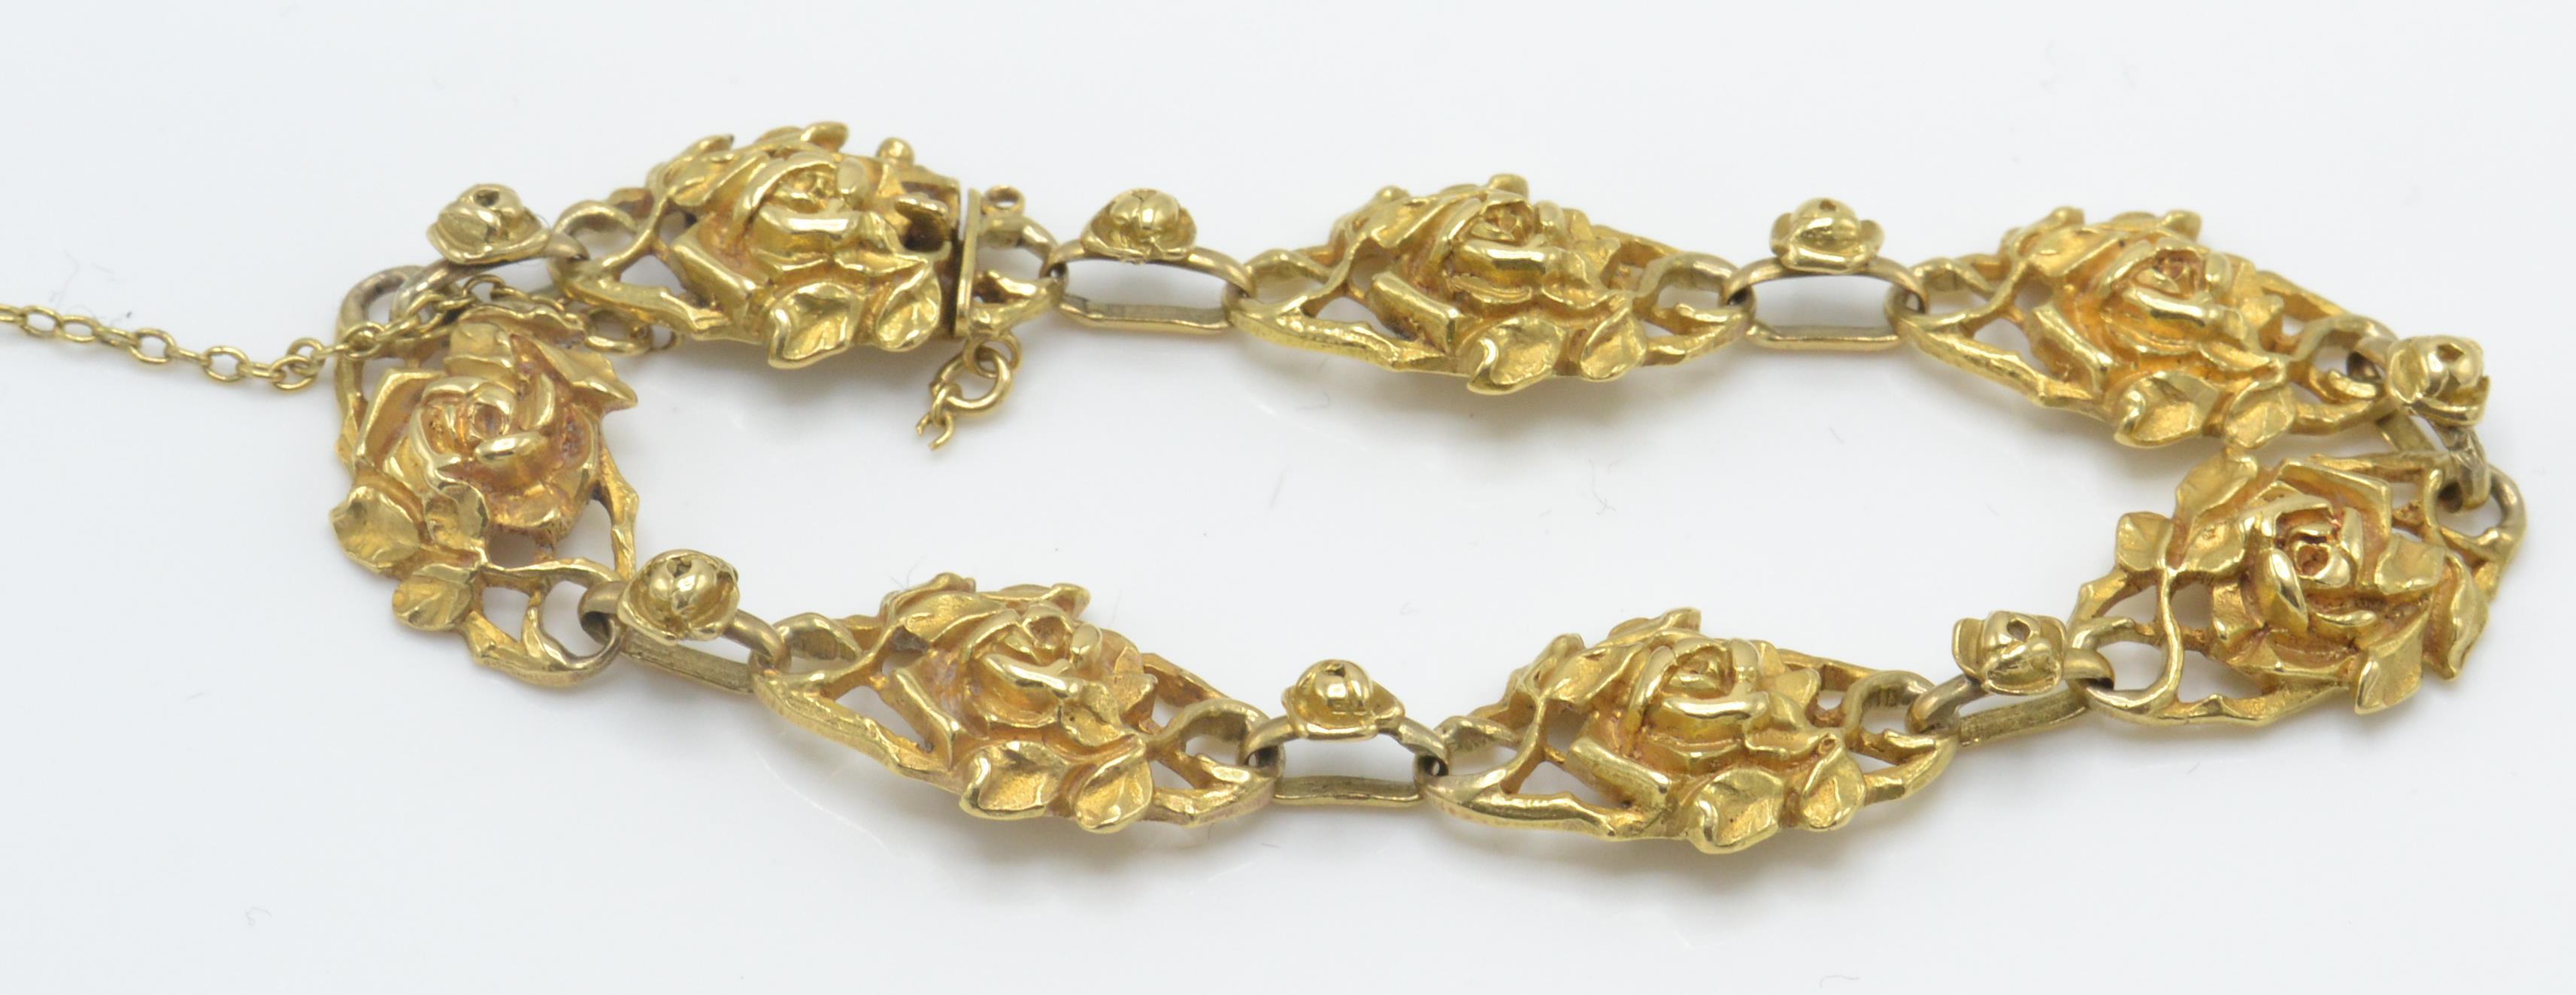 A French gold Art Nouveau seven link bracelet. The bracelet form of openwork links in the form of - Image 7 of 8